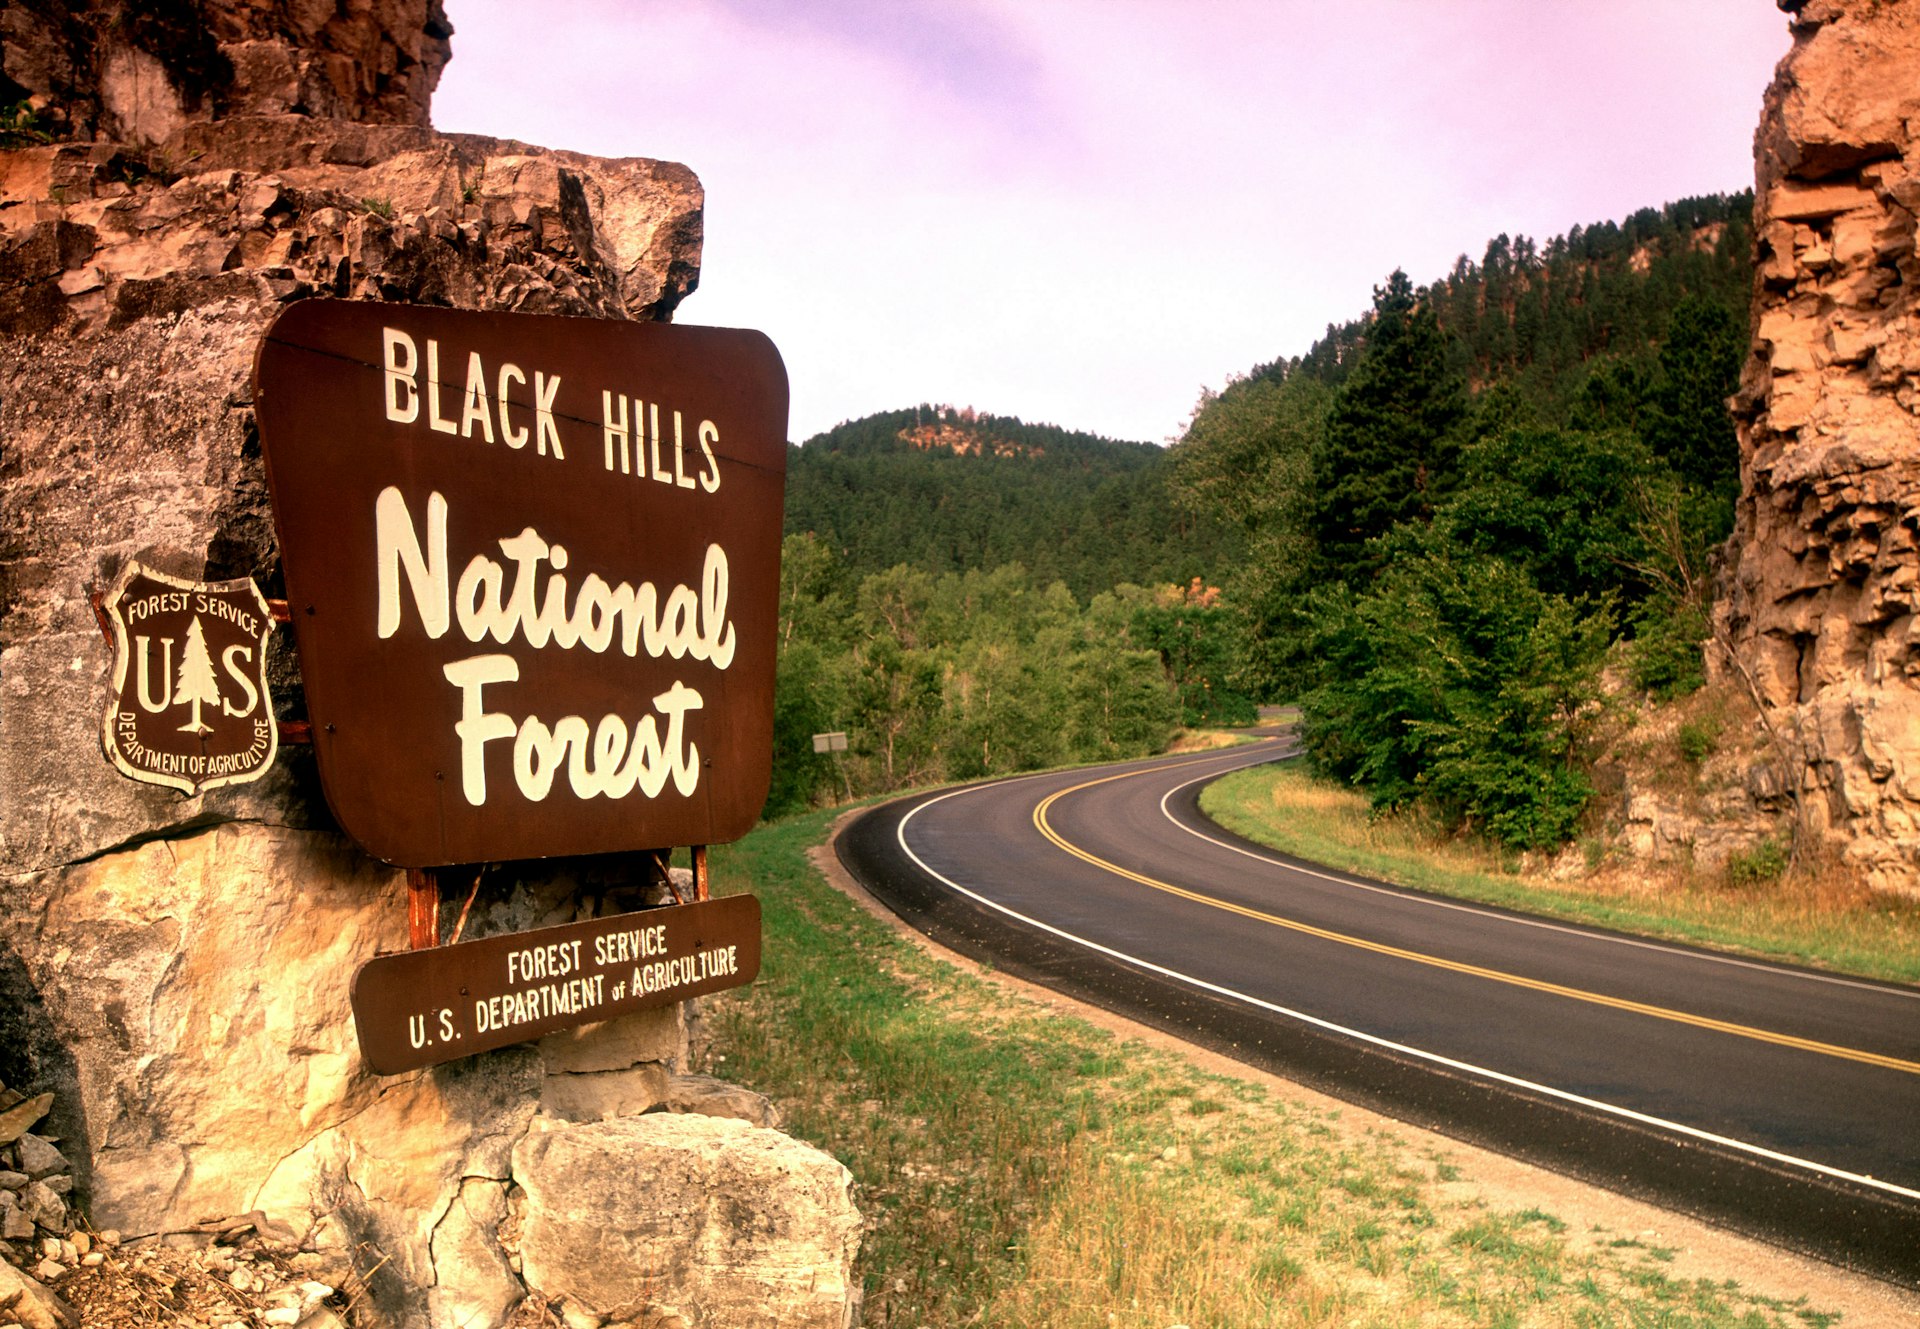 Entrance to Black Hills National Forest. Image by John Coletti / AWL Images / Getty